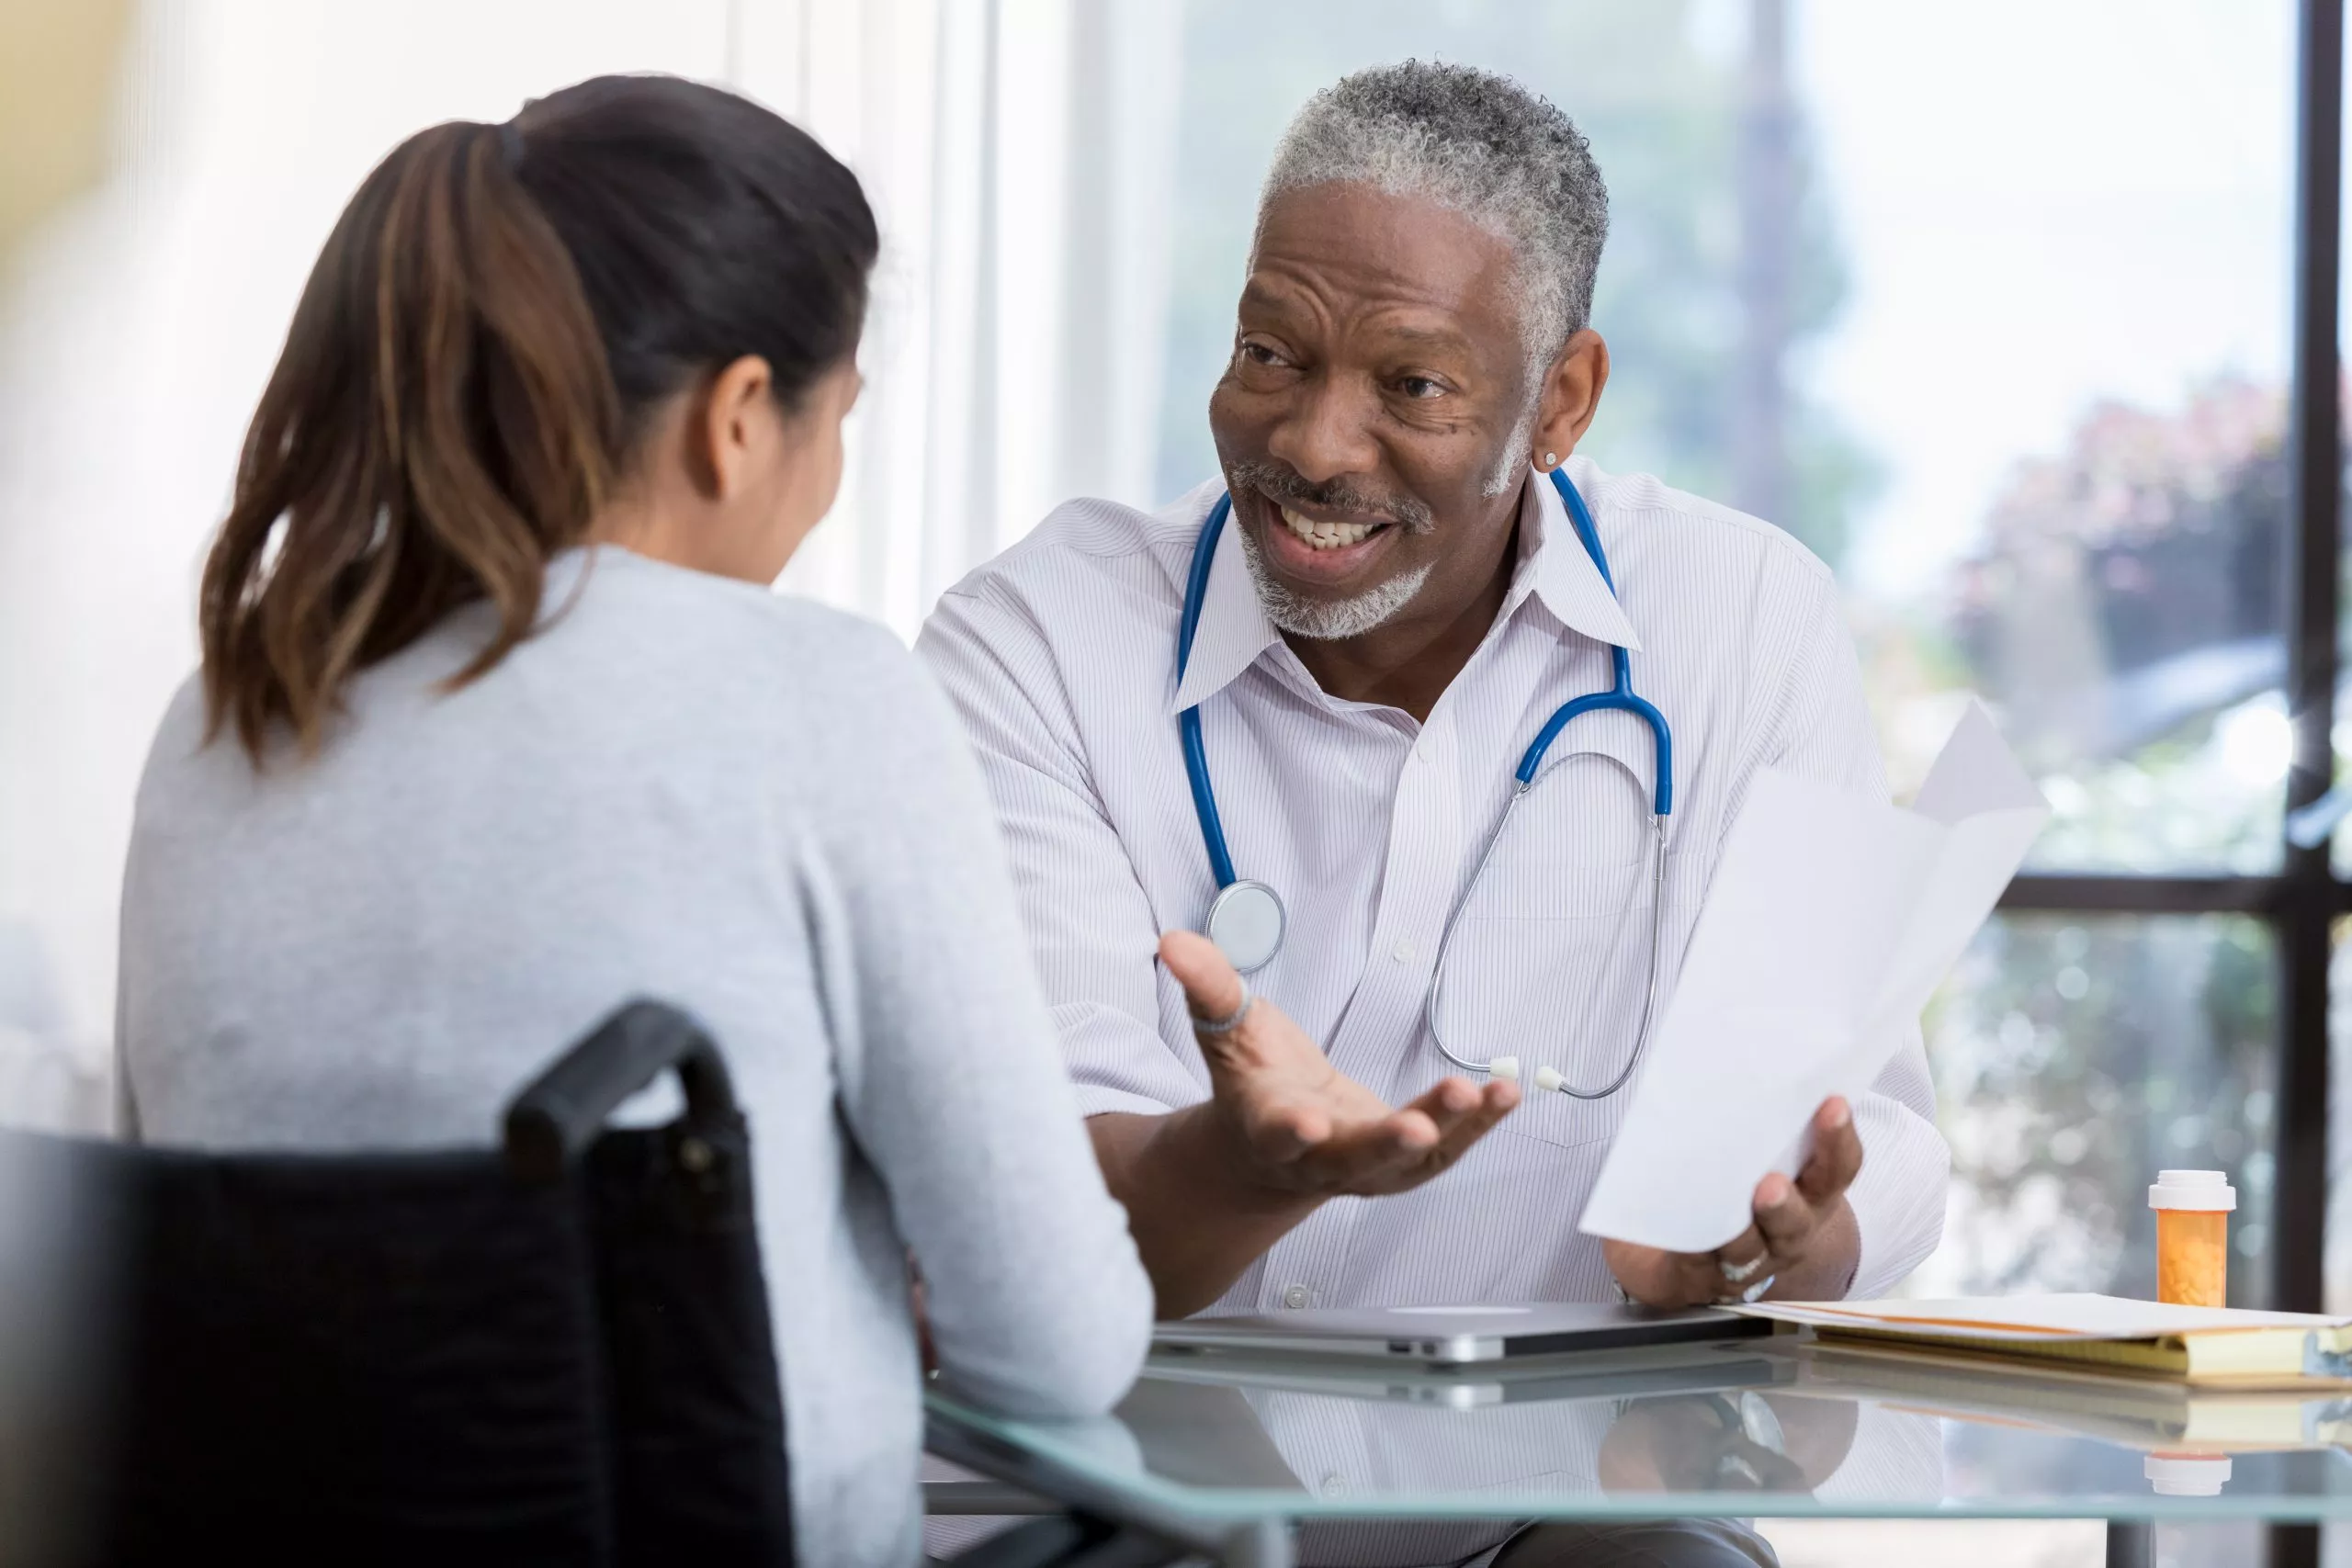 Senior doctor talks with female patient